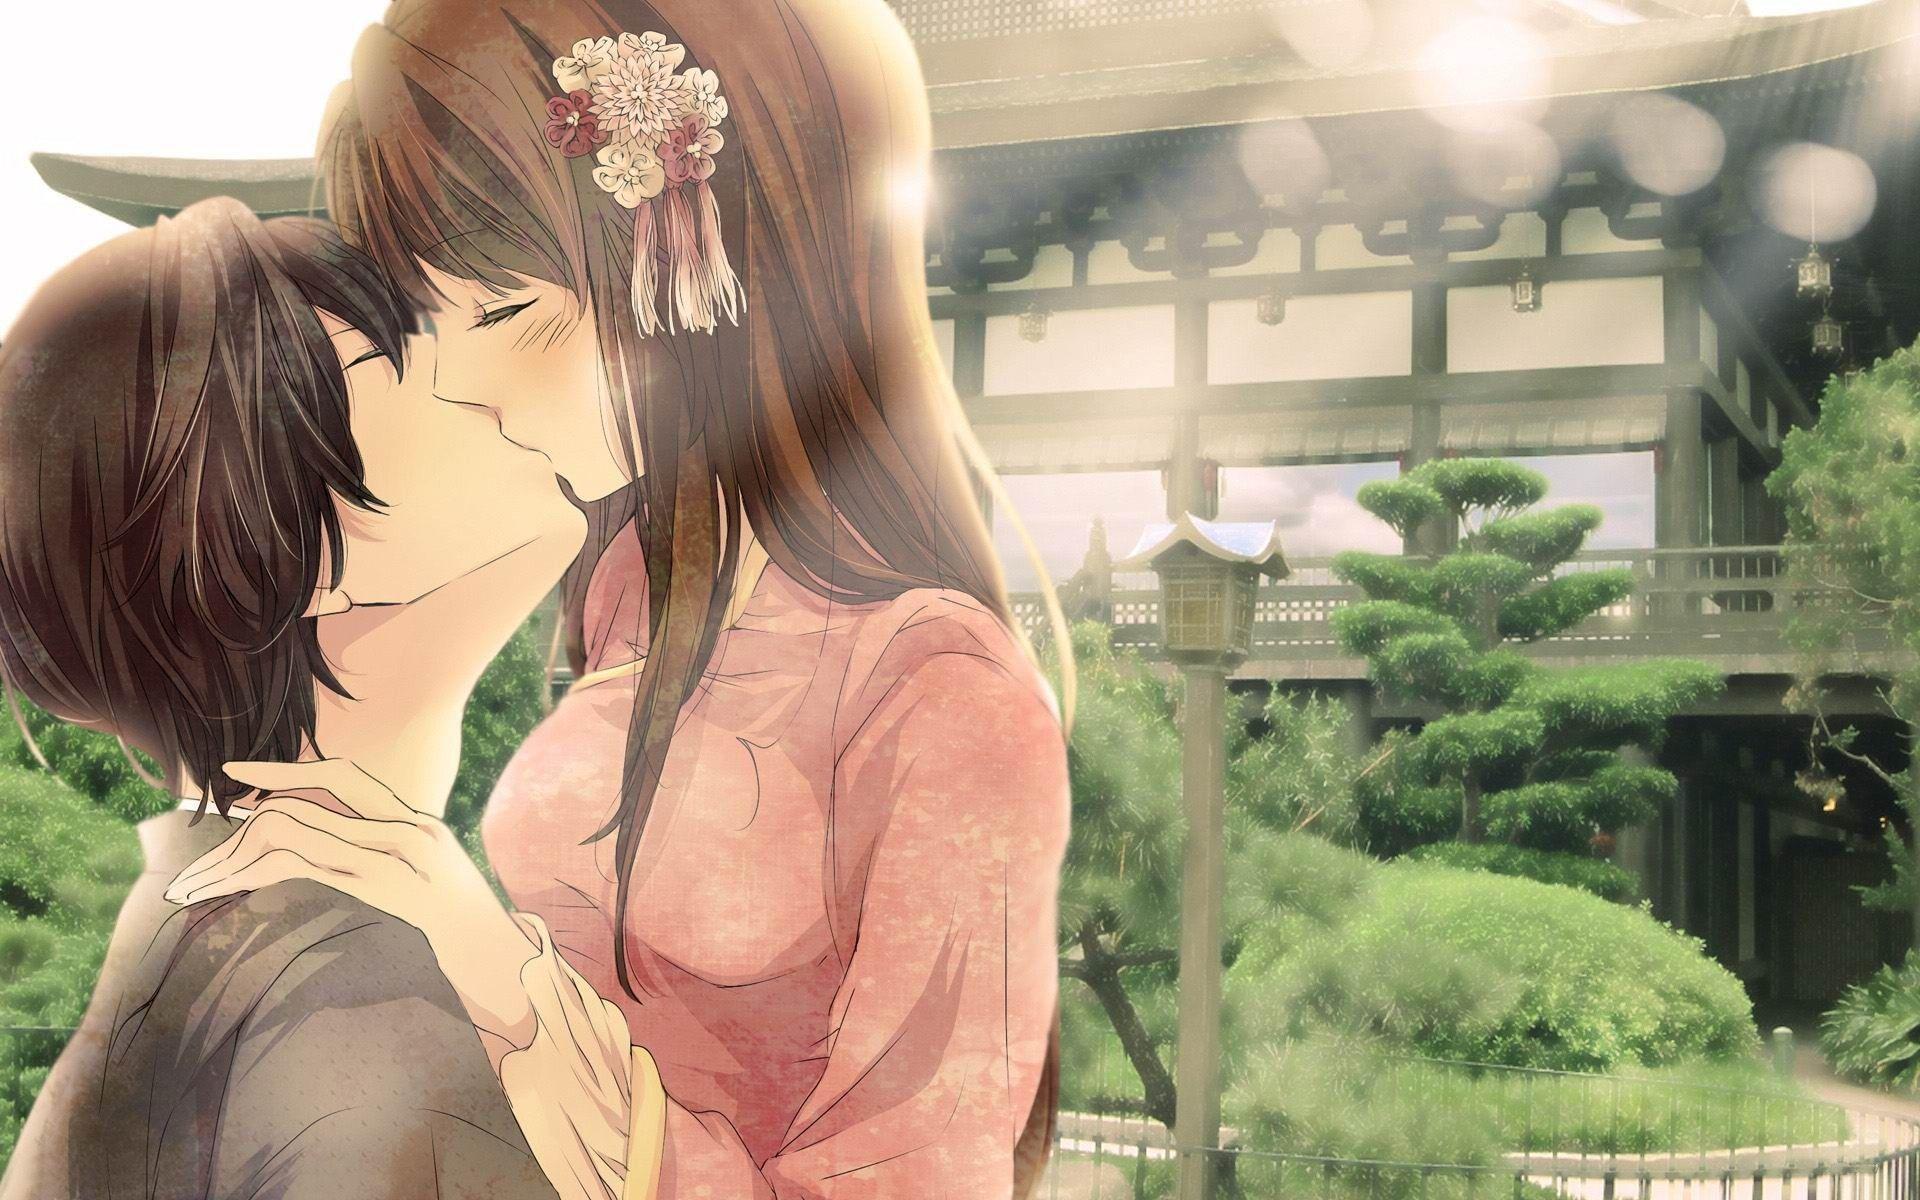 Cute Anime Couple Kiss HD Wallpapers For Desktop Backgrounds